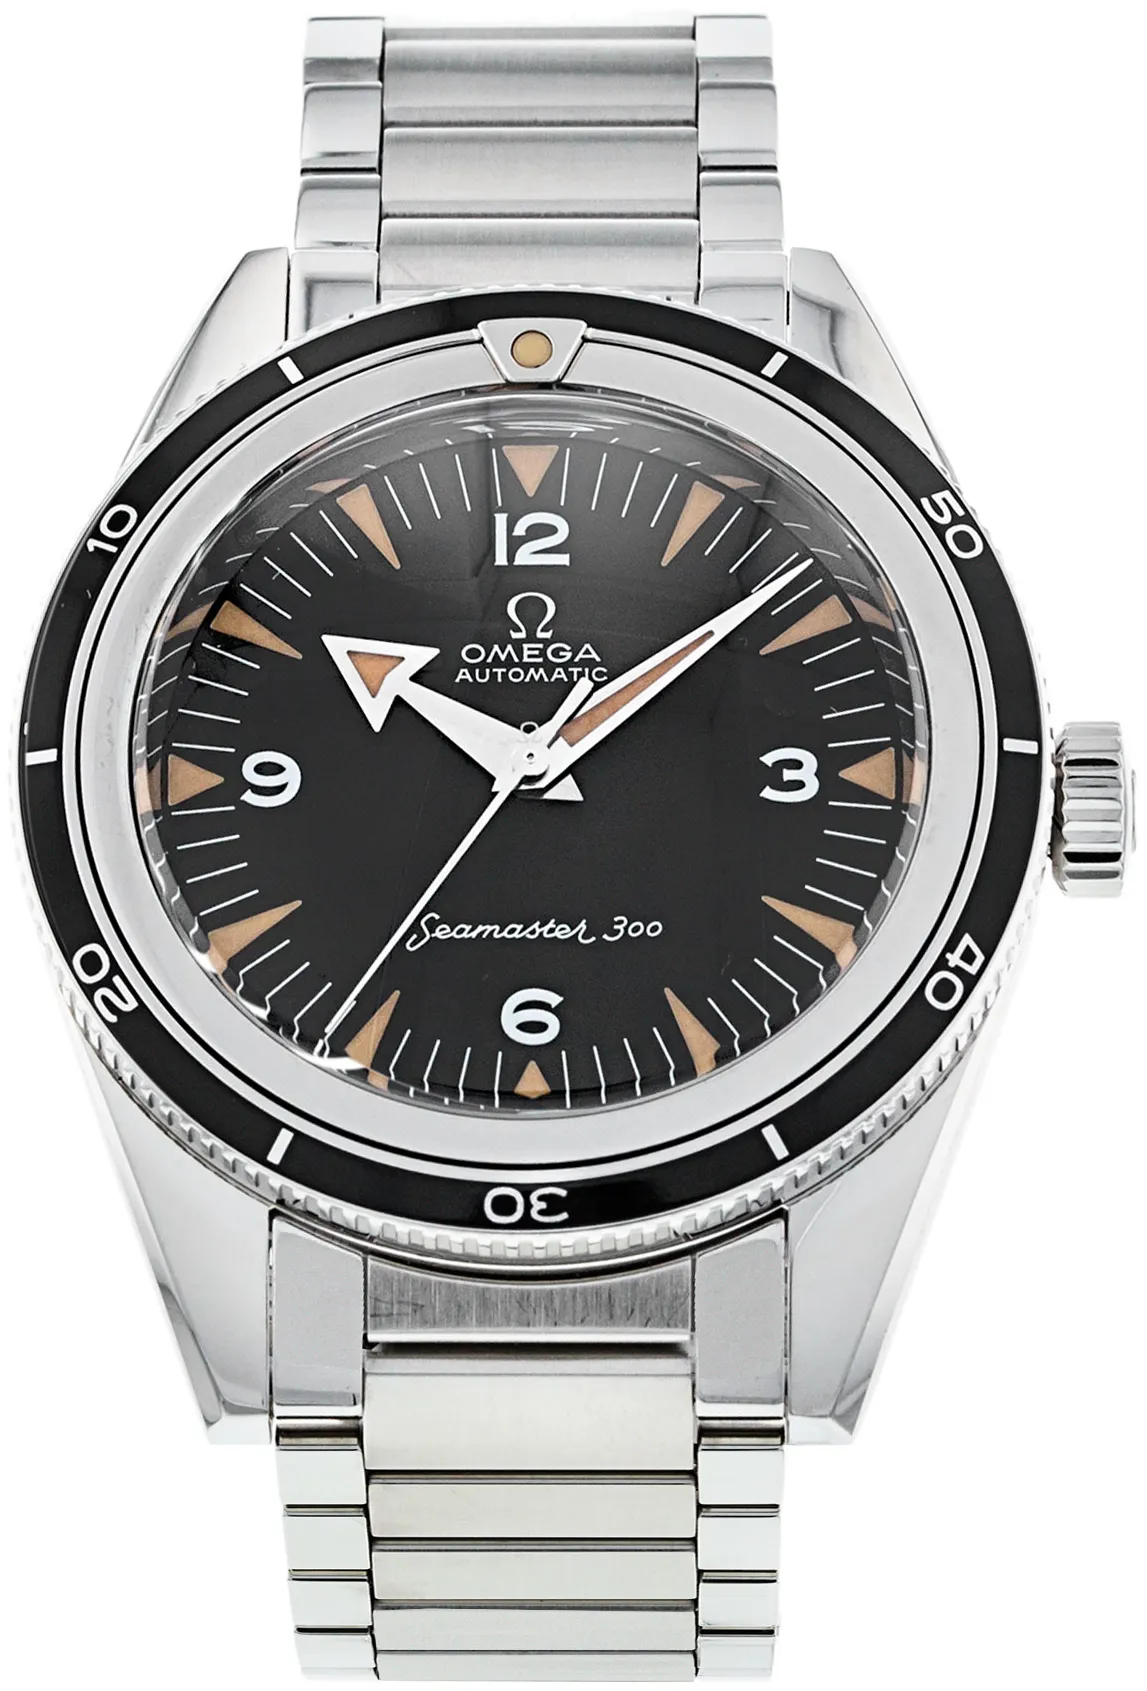 Omega Seamaster 300 234.10.39.20.01.001 39mm Stainless steel